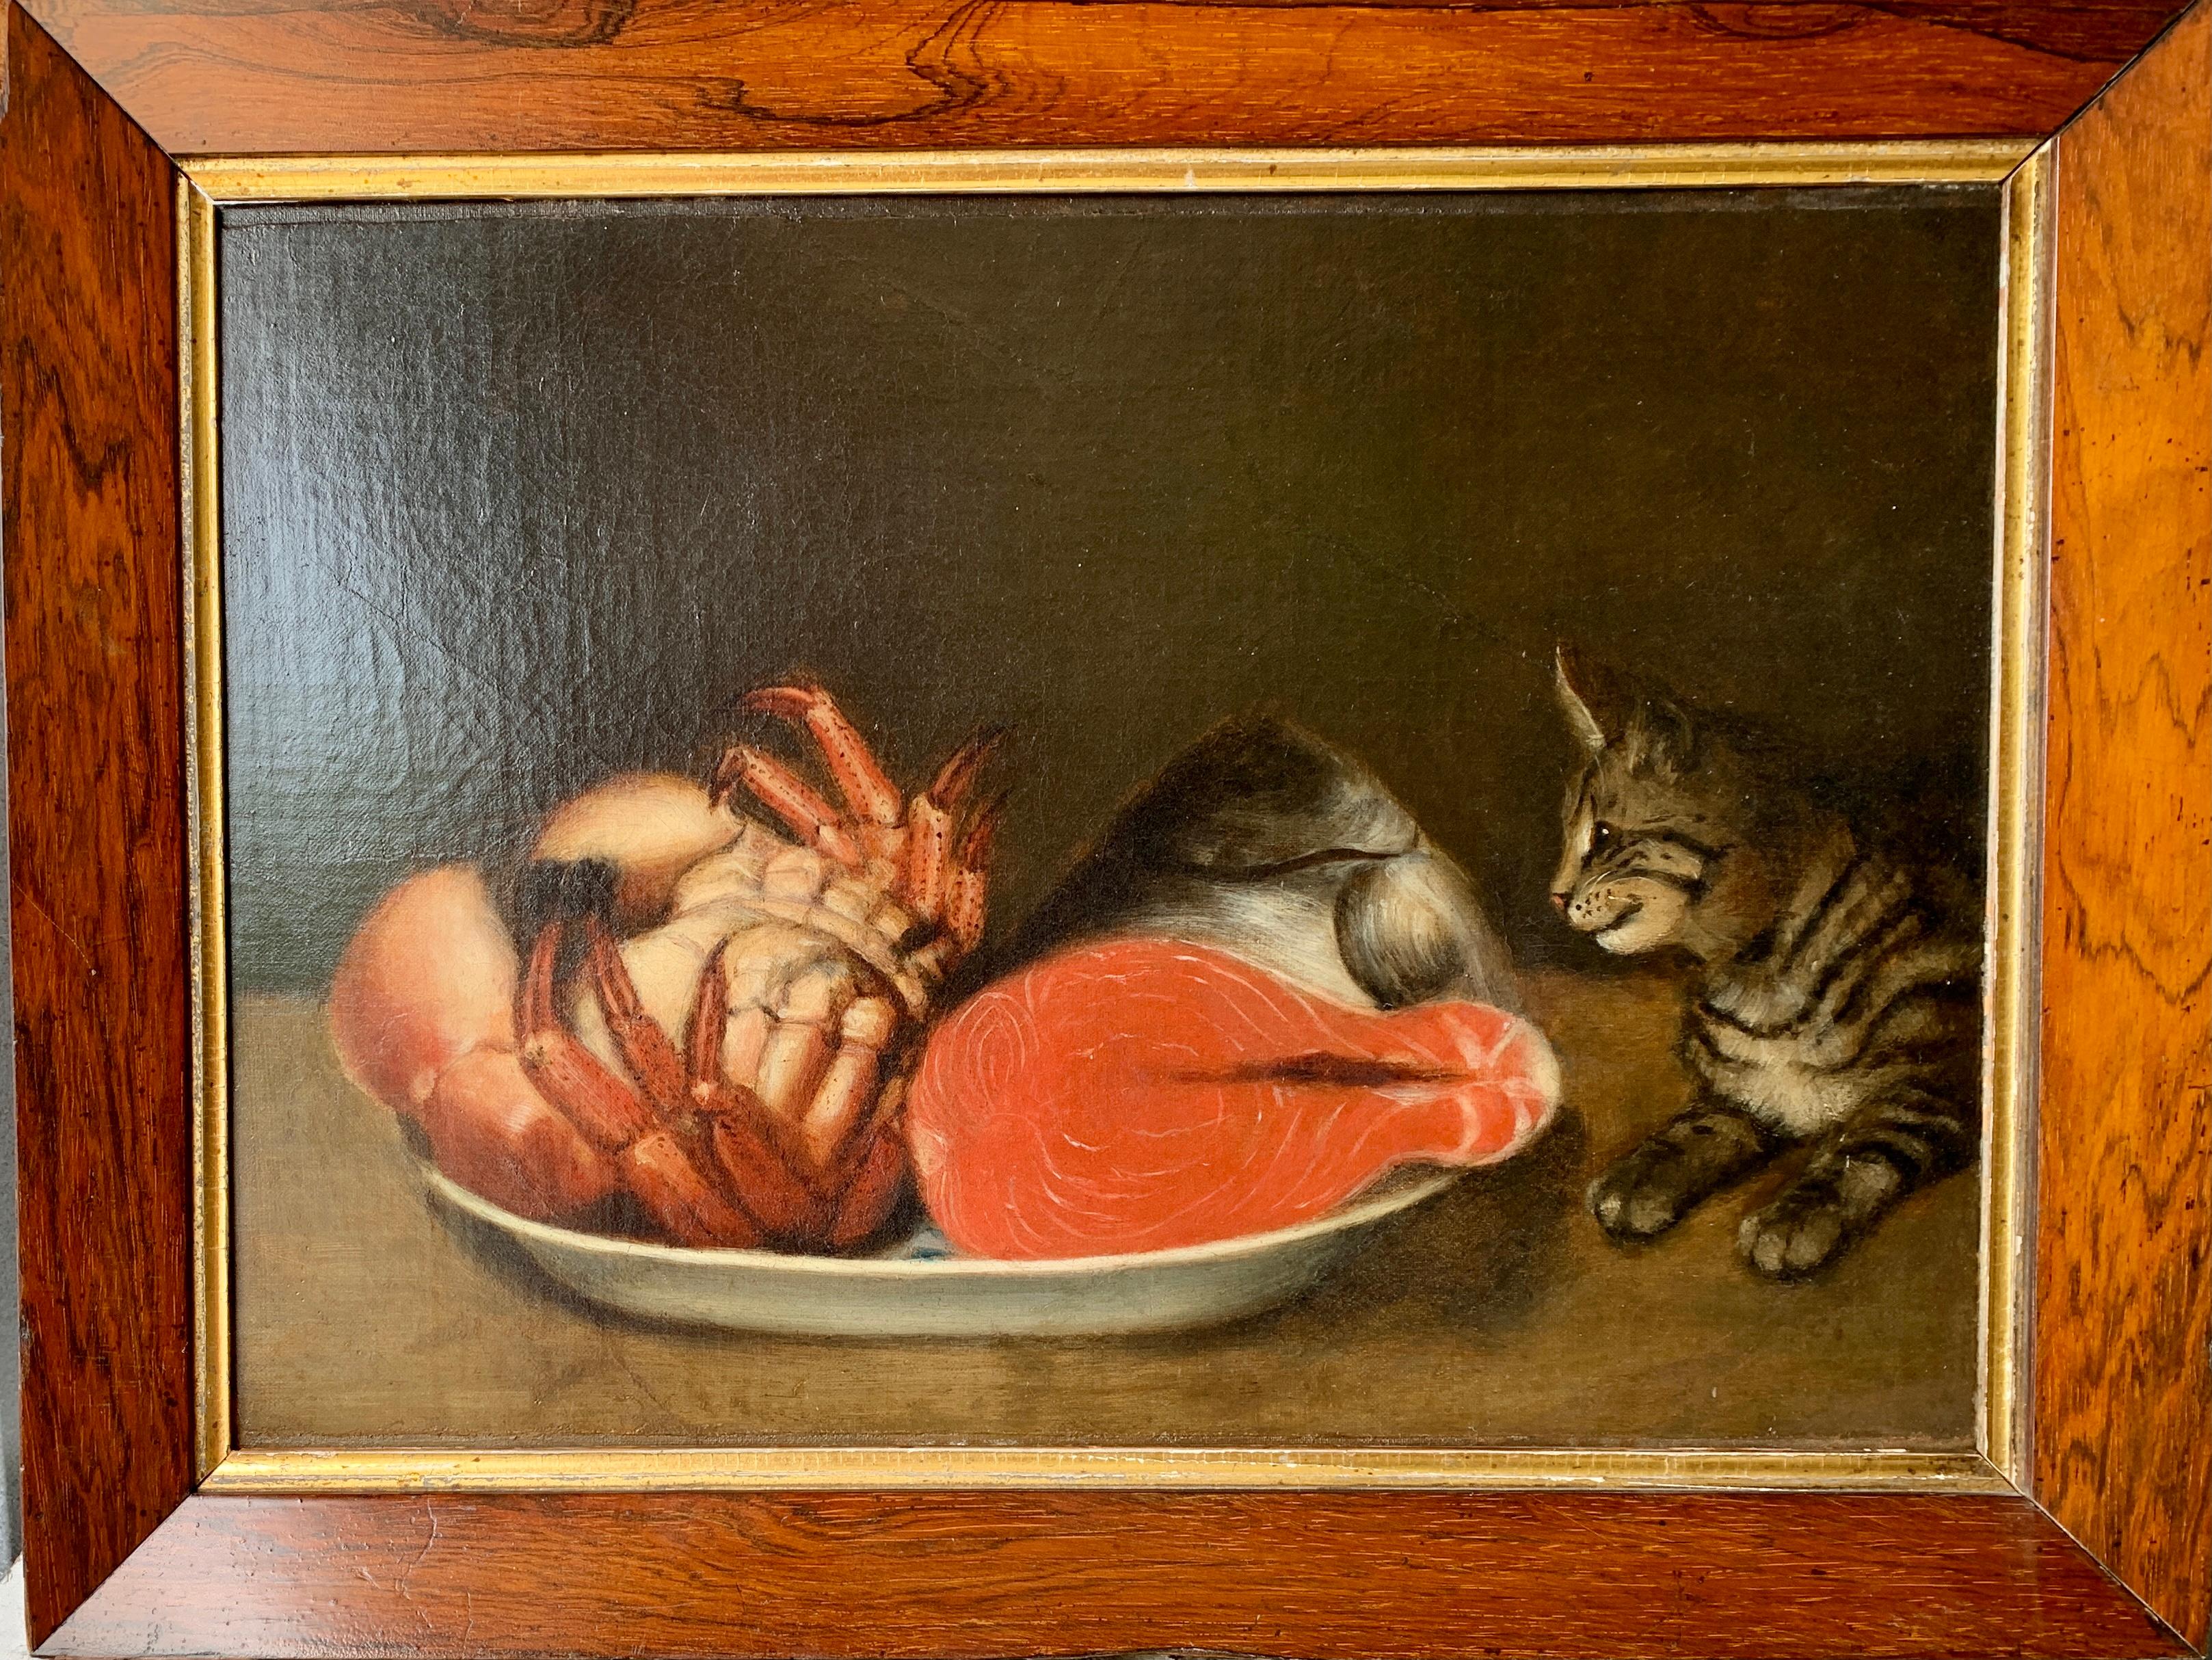 19th century English Folk Art, cat looking at with crab and fish in a bowel